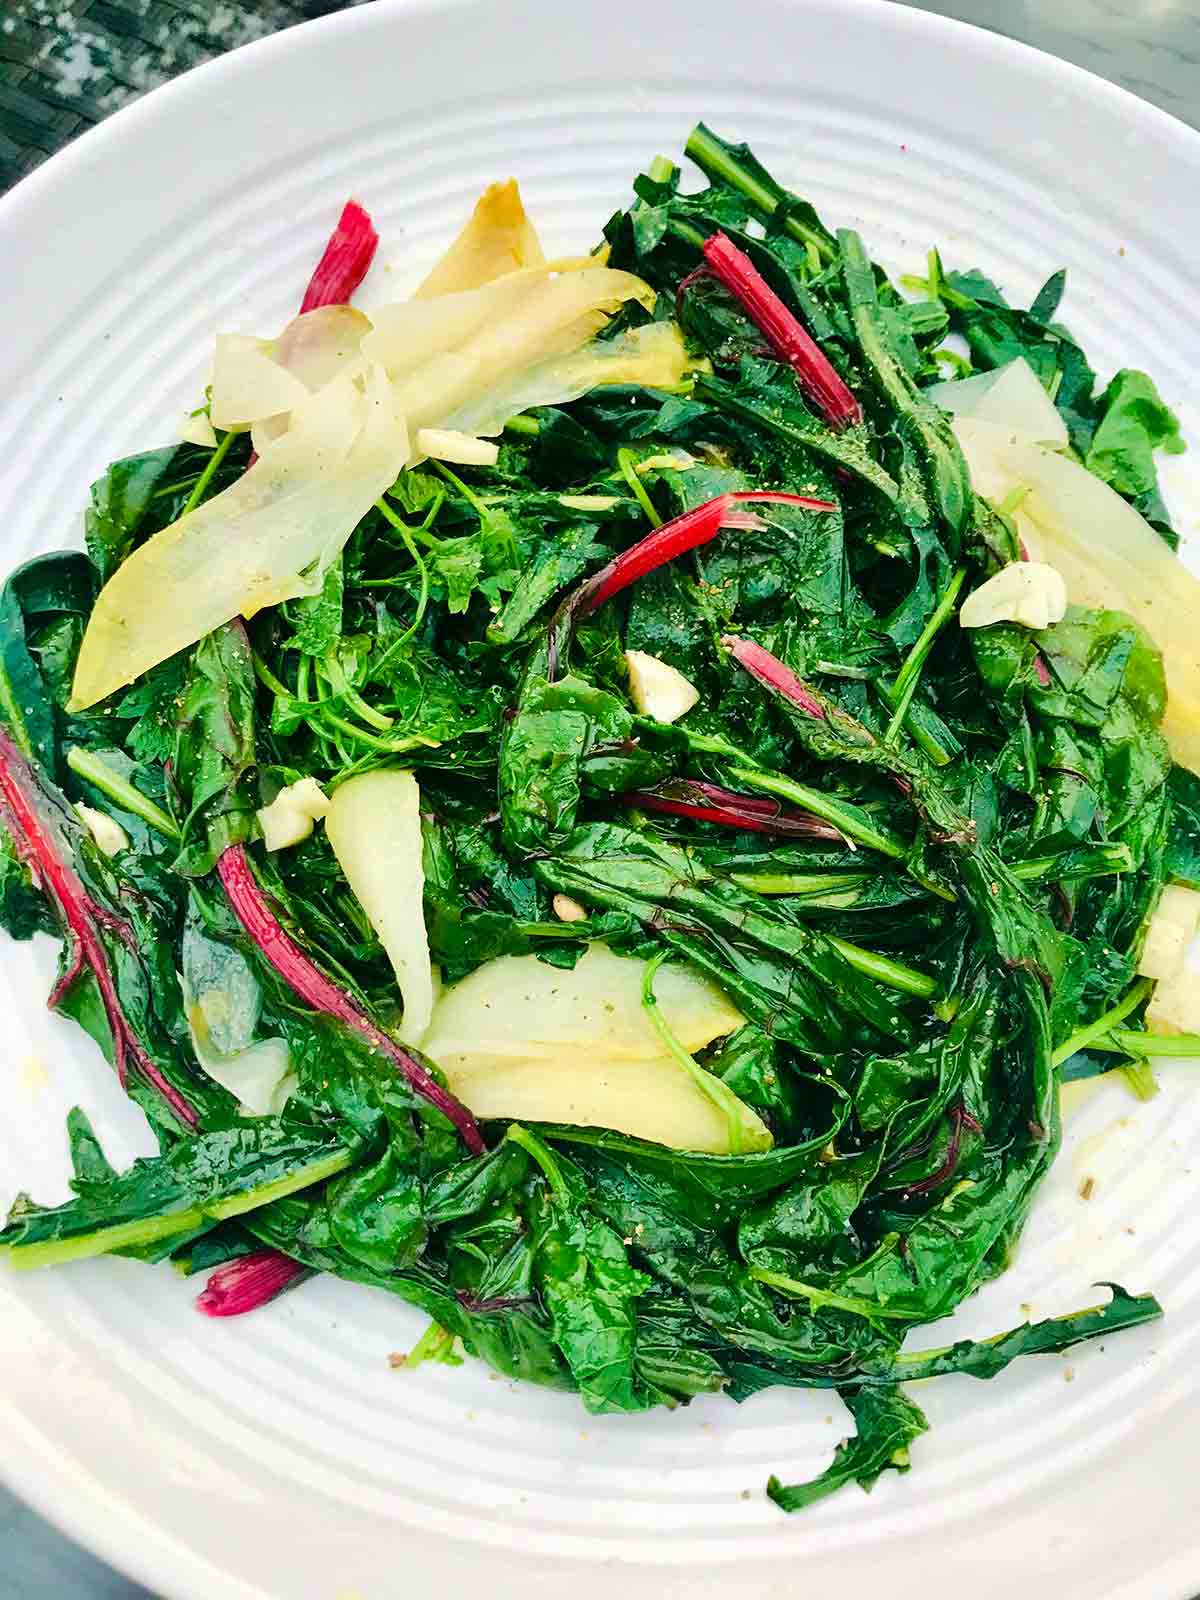 A white plate filled with horta, or boiled greens with garlic.